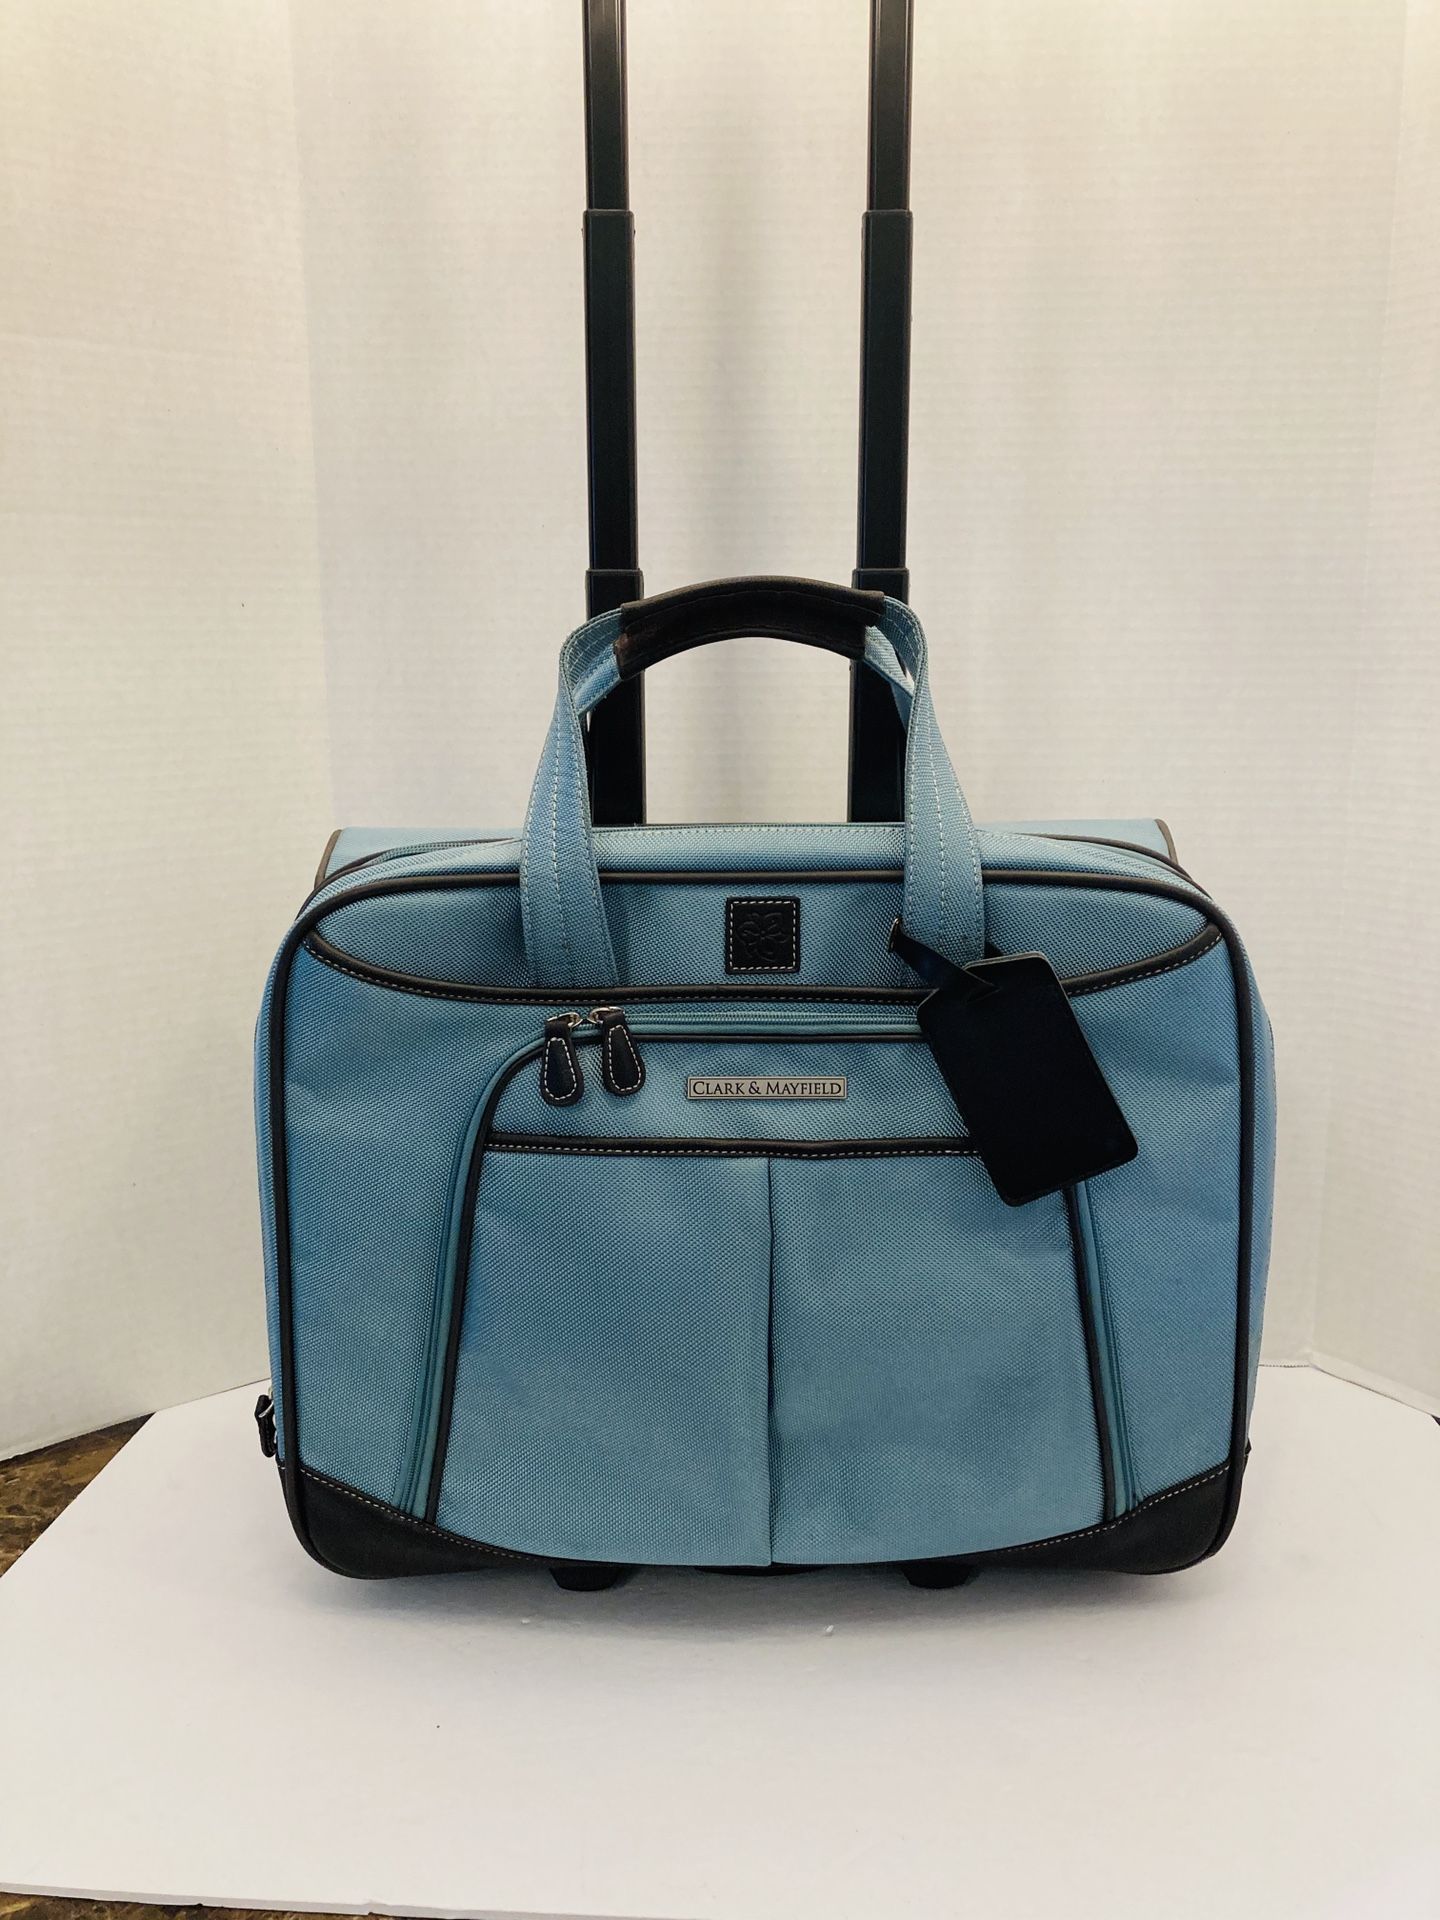 Clark & Mayfield Teal Rolling Laptop / Luggage Bag